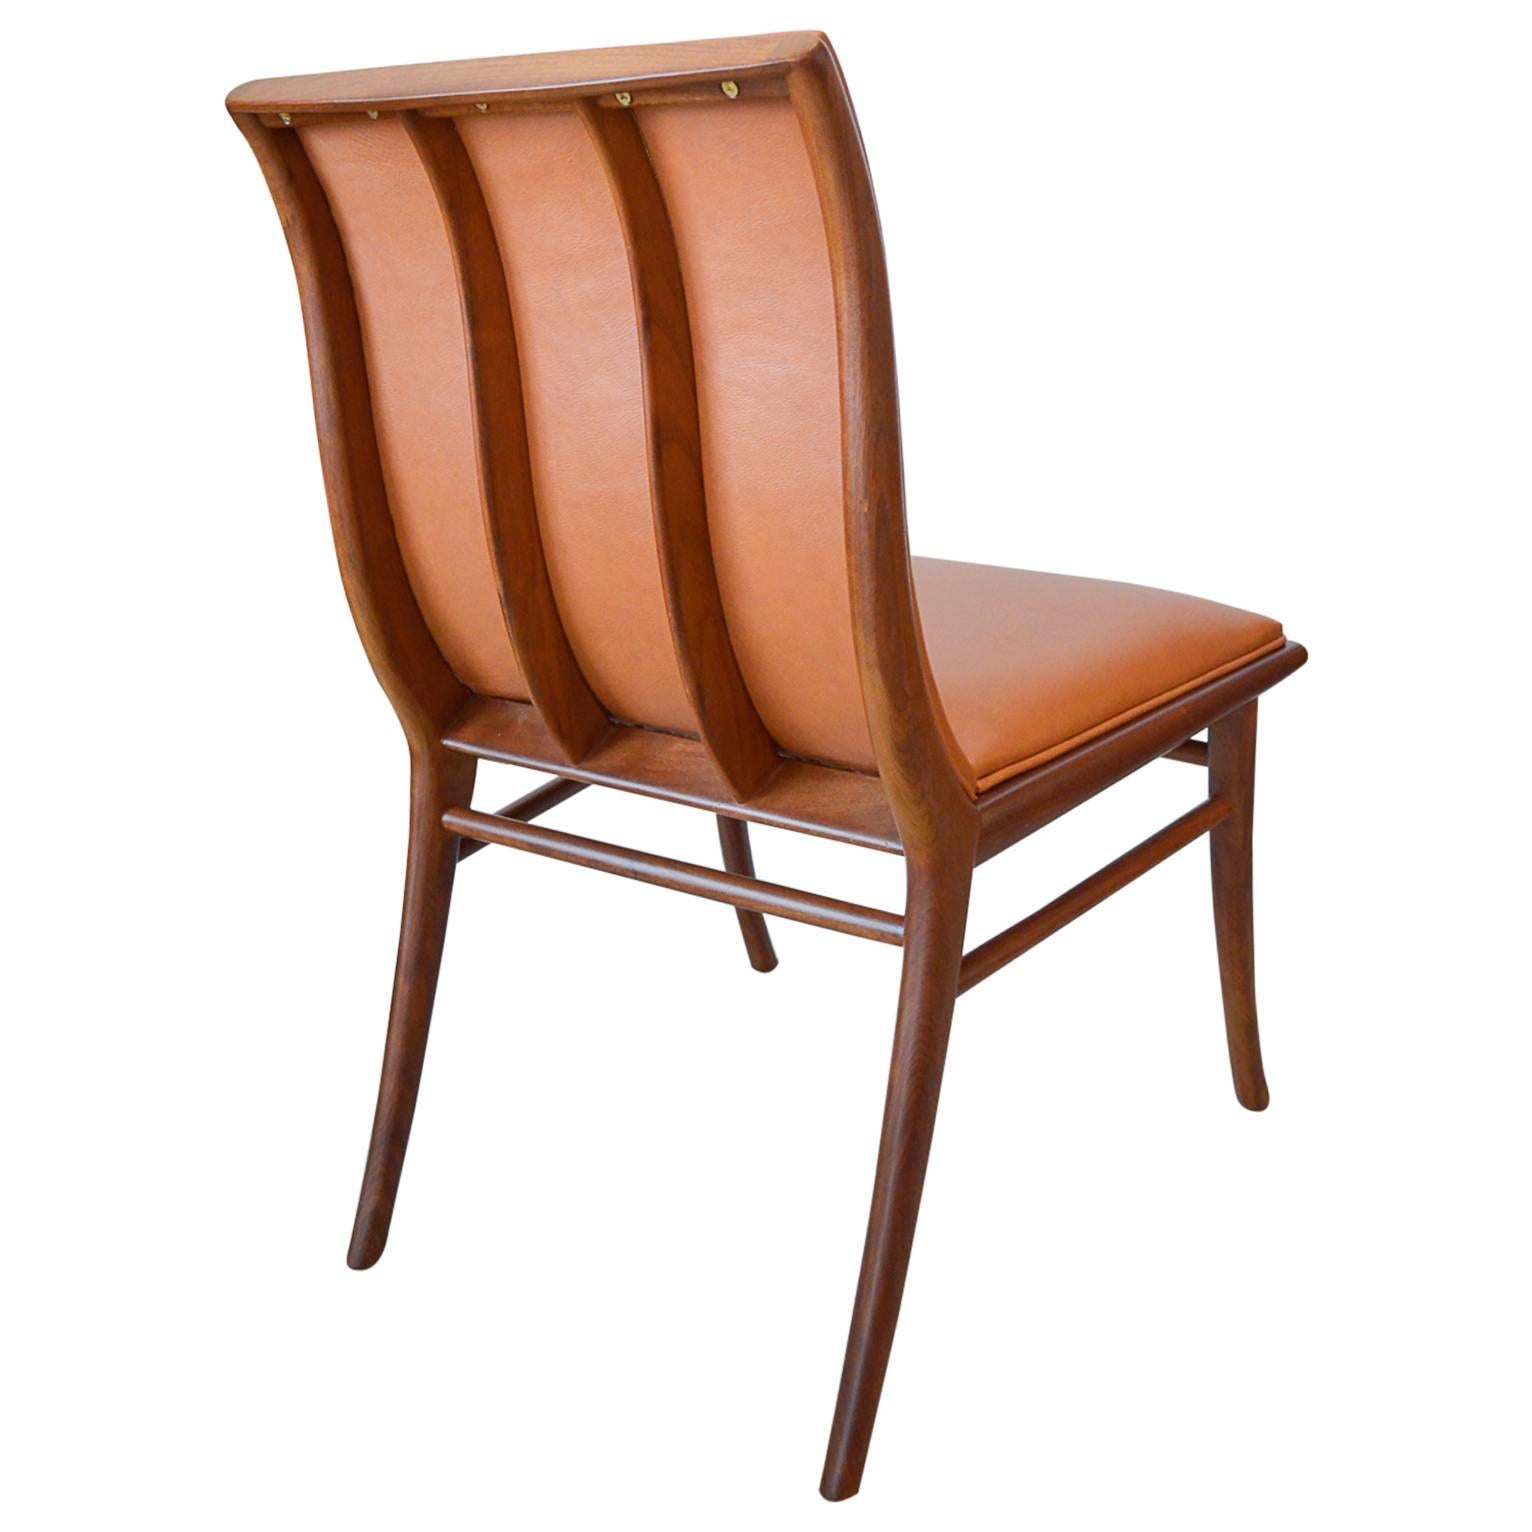 Leather and Walnut Sabre Leg Accent Chair by T.H. Robsjohn-Gibbings